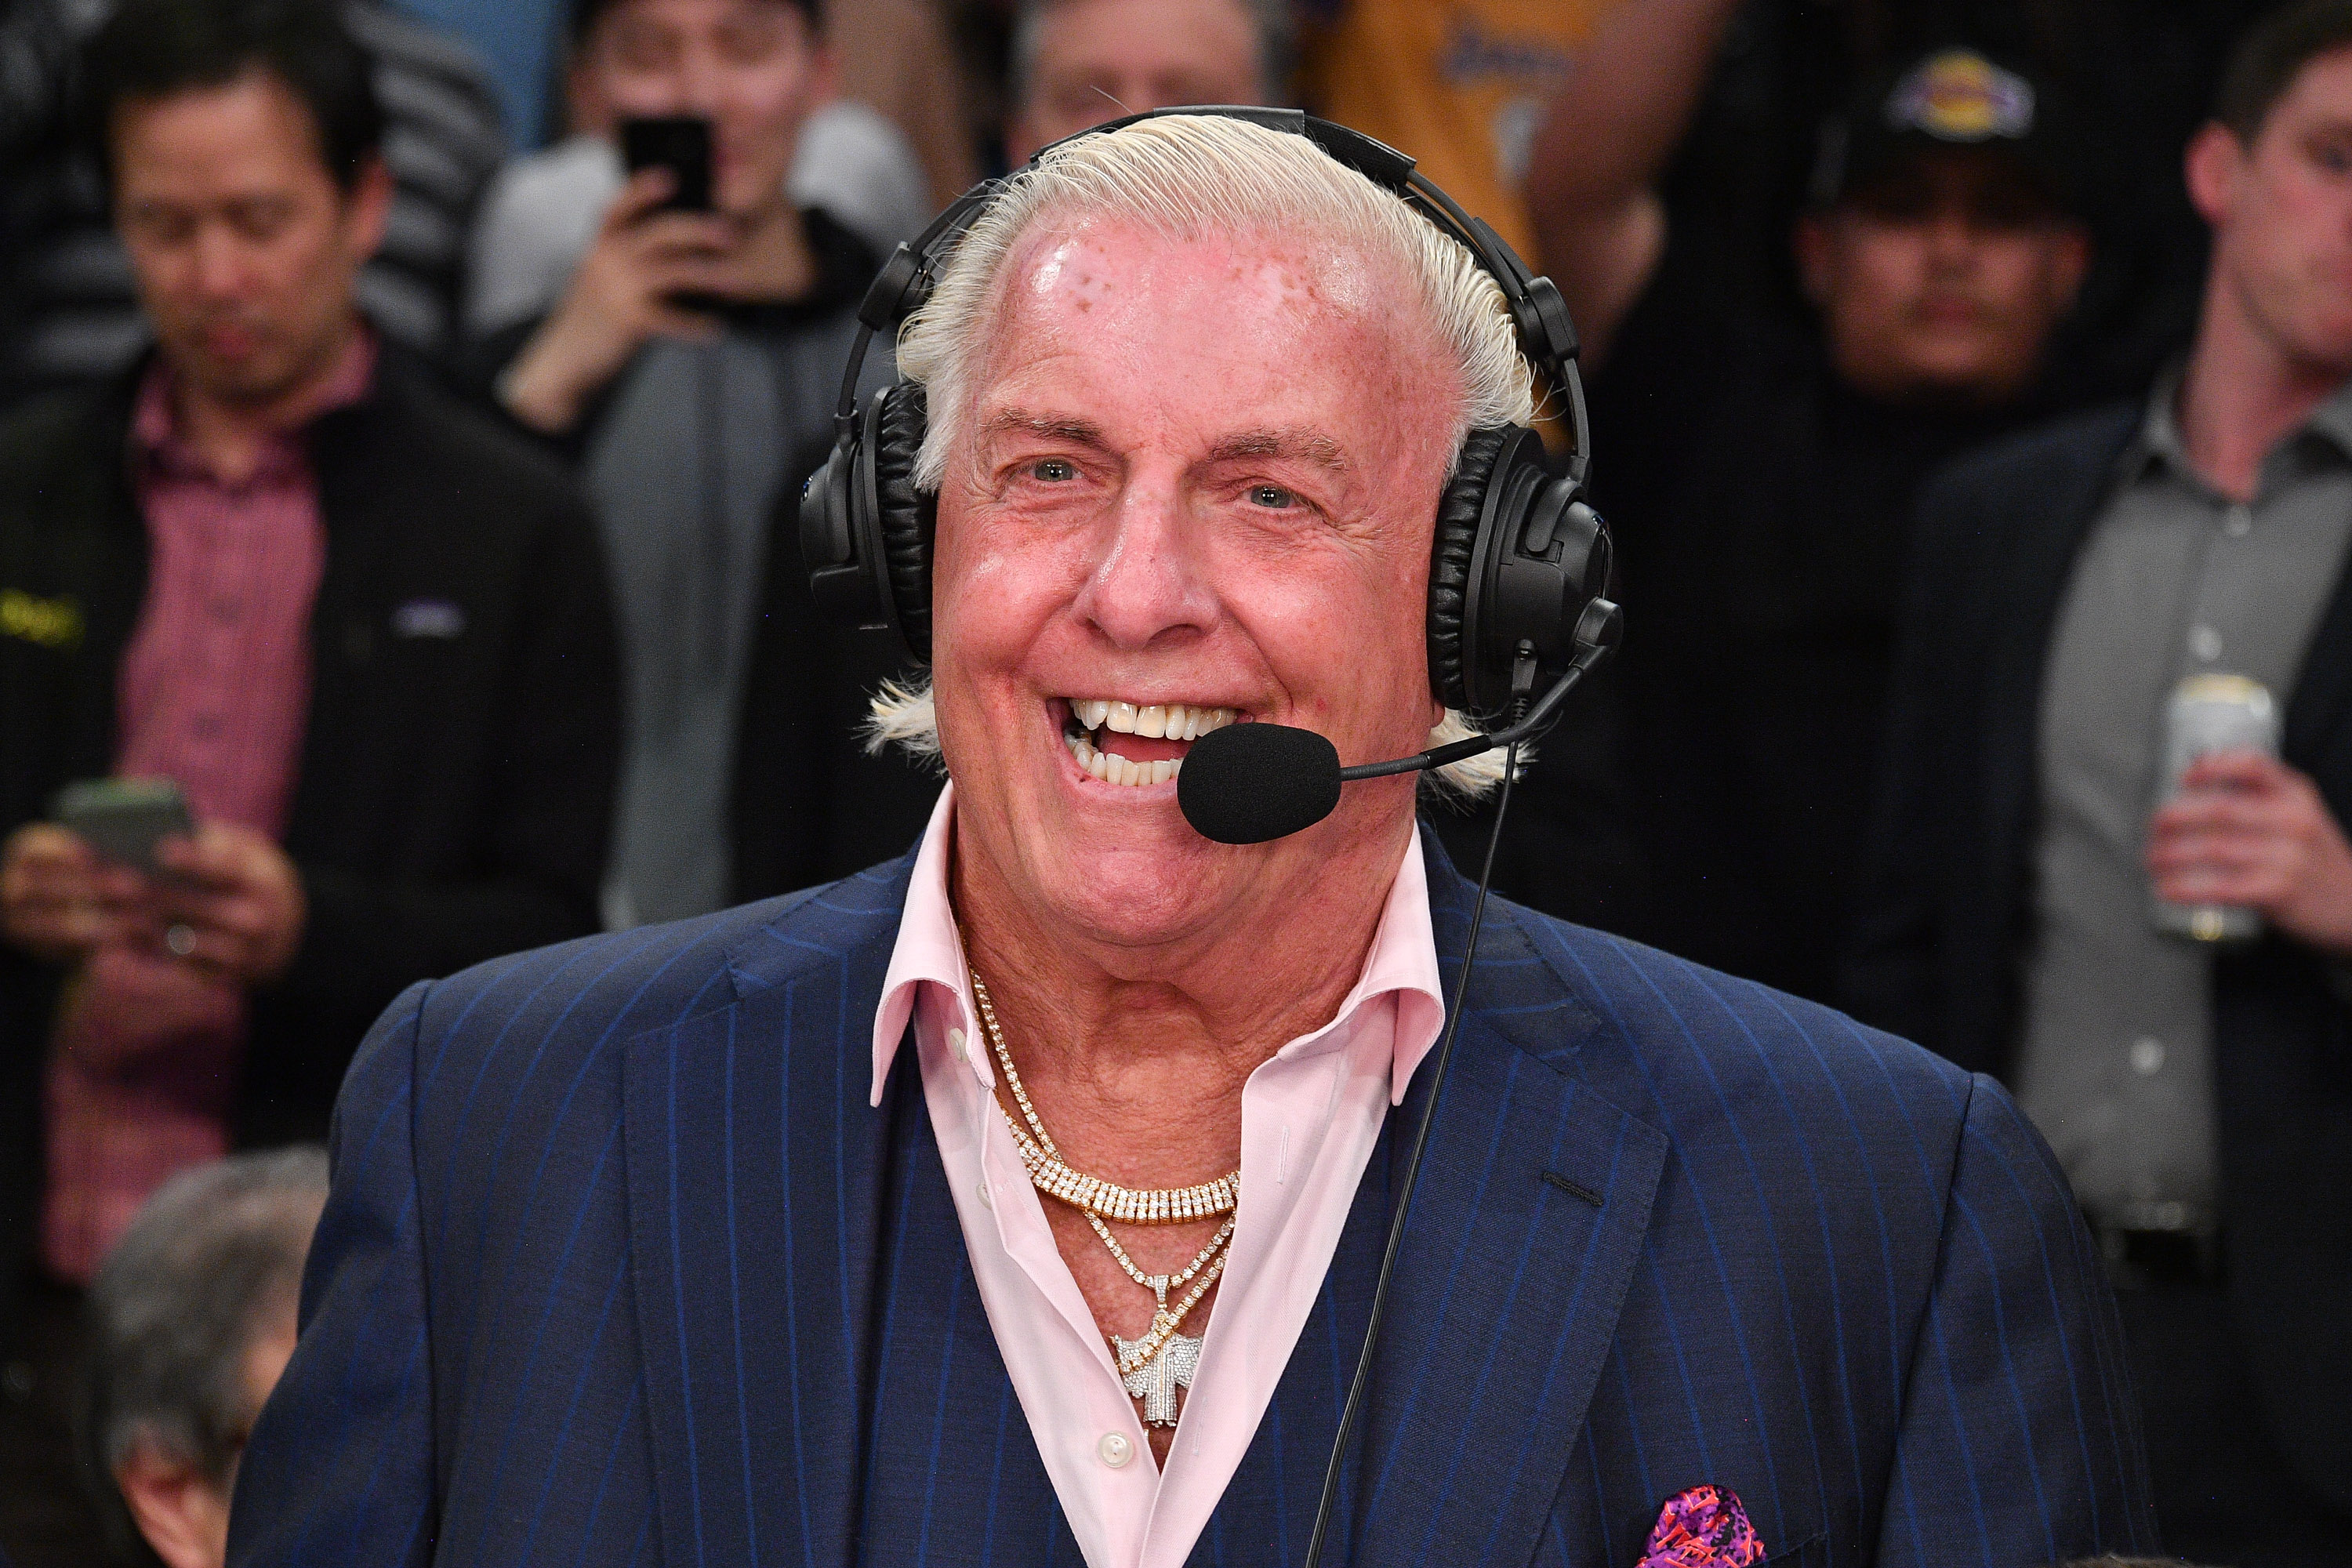 WWE HOFer Ric Flair Wins Last Match; Teamed with Andrade vs. Jeff Jarrett, Jay Lethal